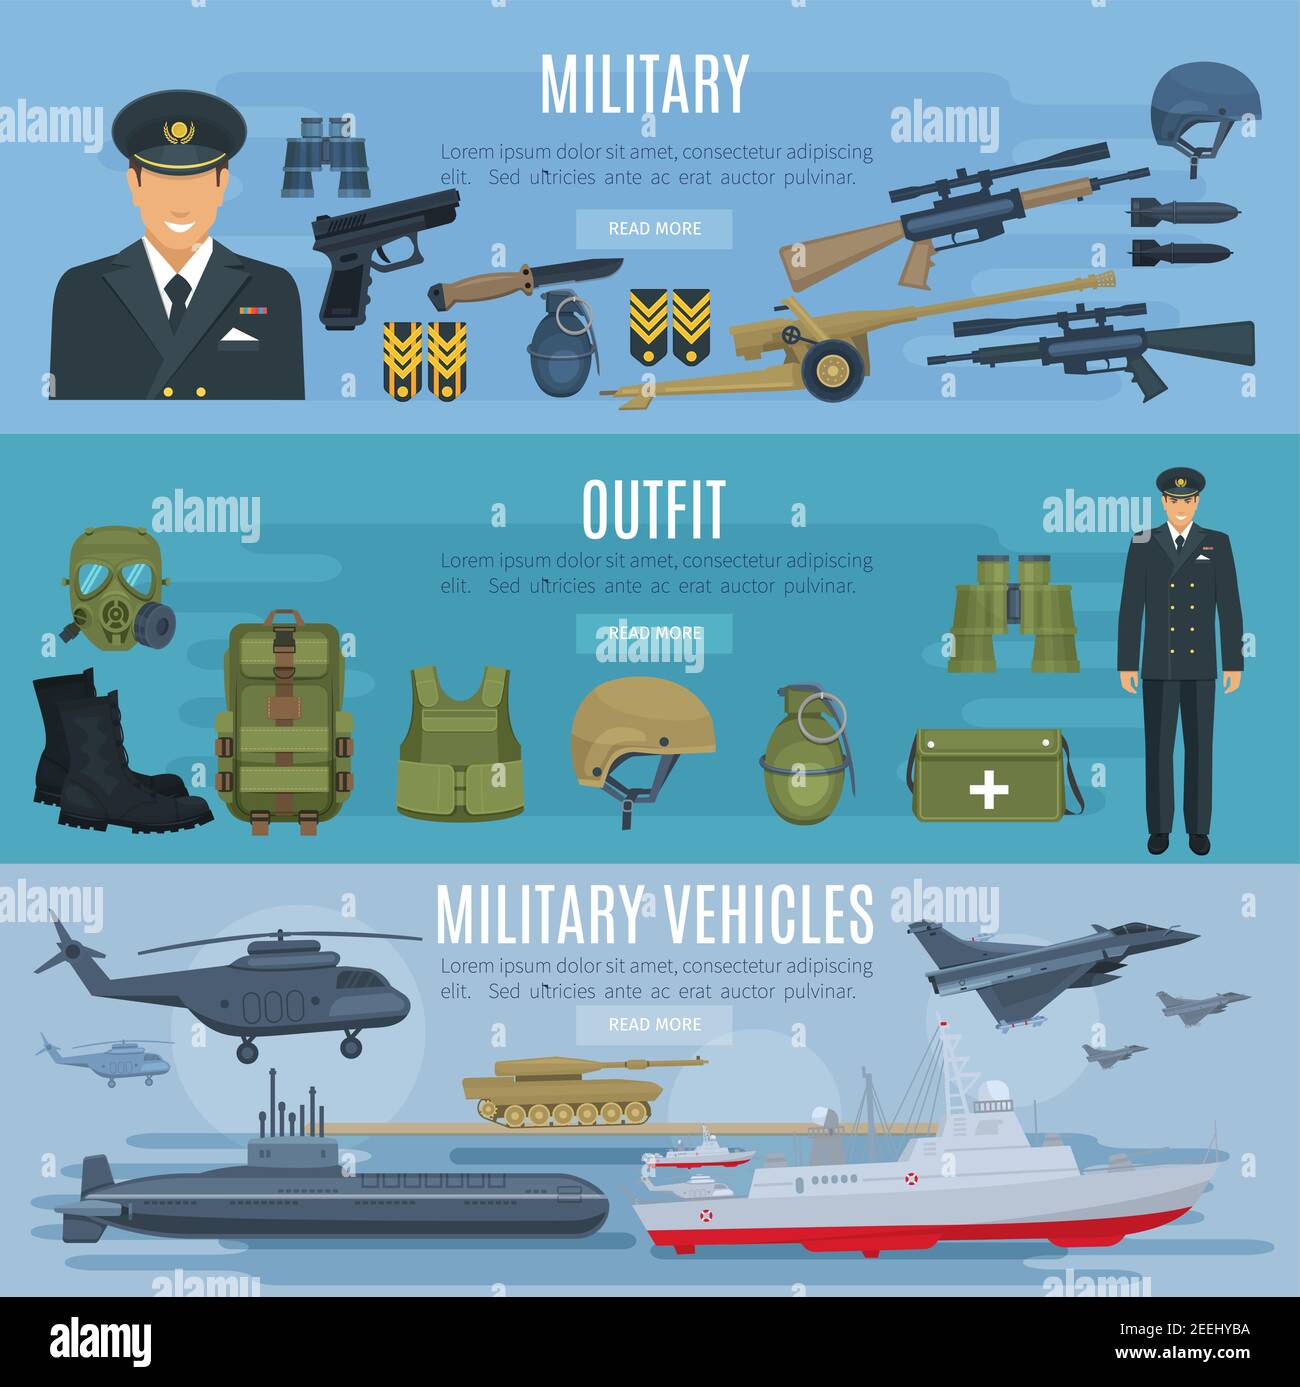 Military forces vehicles, outfit and weapon arms banners set. Vector design of military soldier in armored jacket and helmet, ammunition gun, tank or Stock Vector